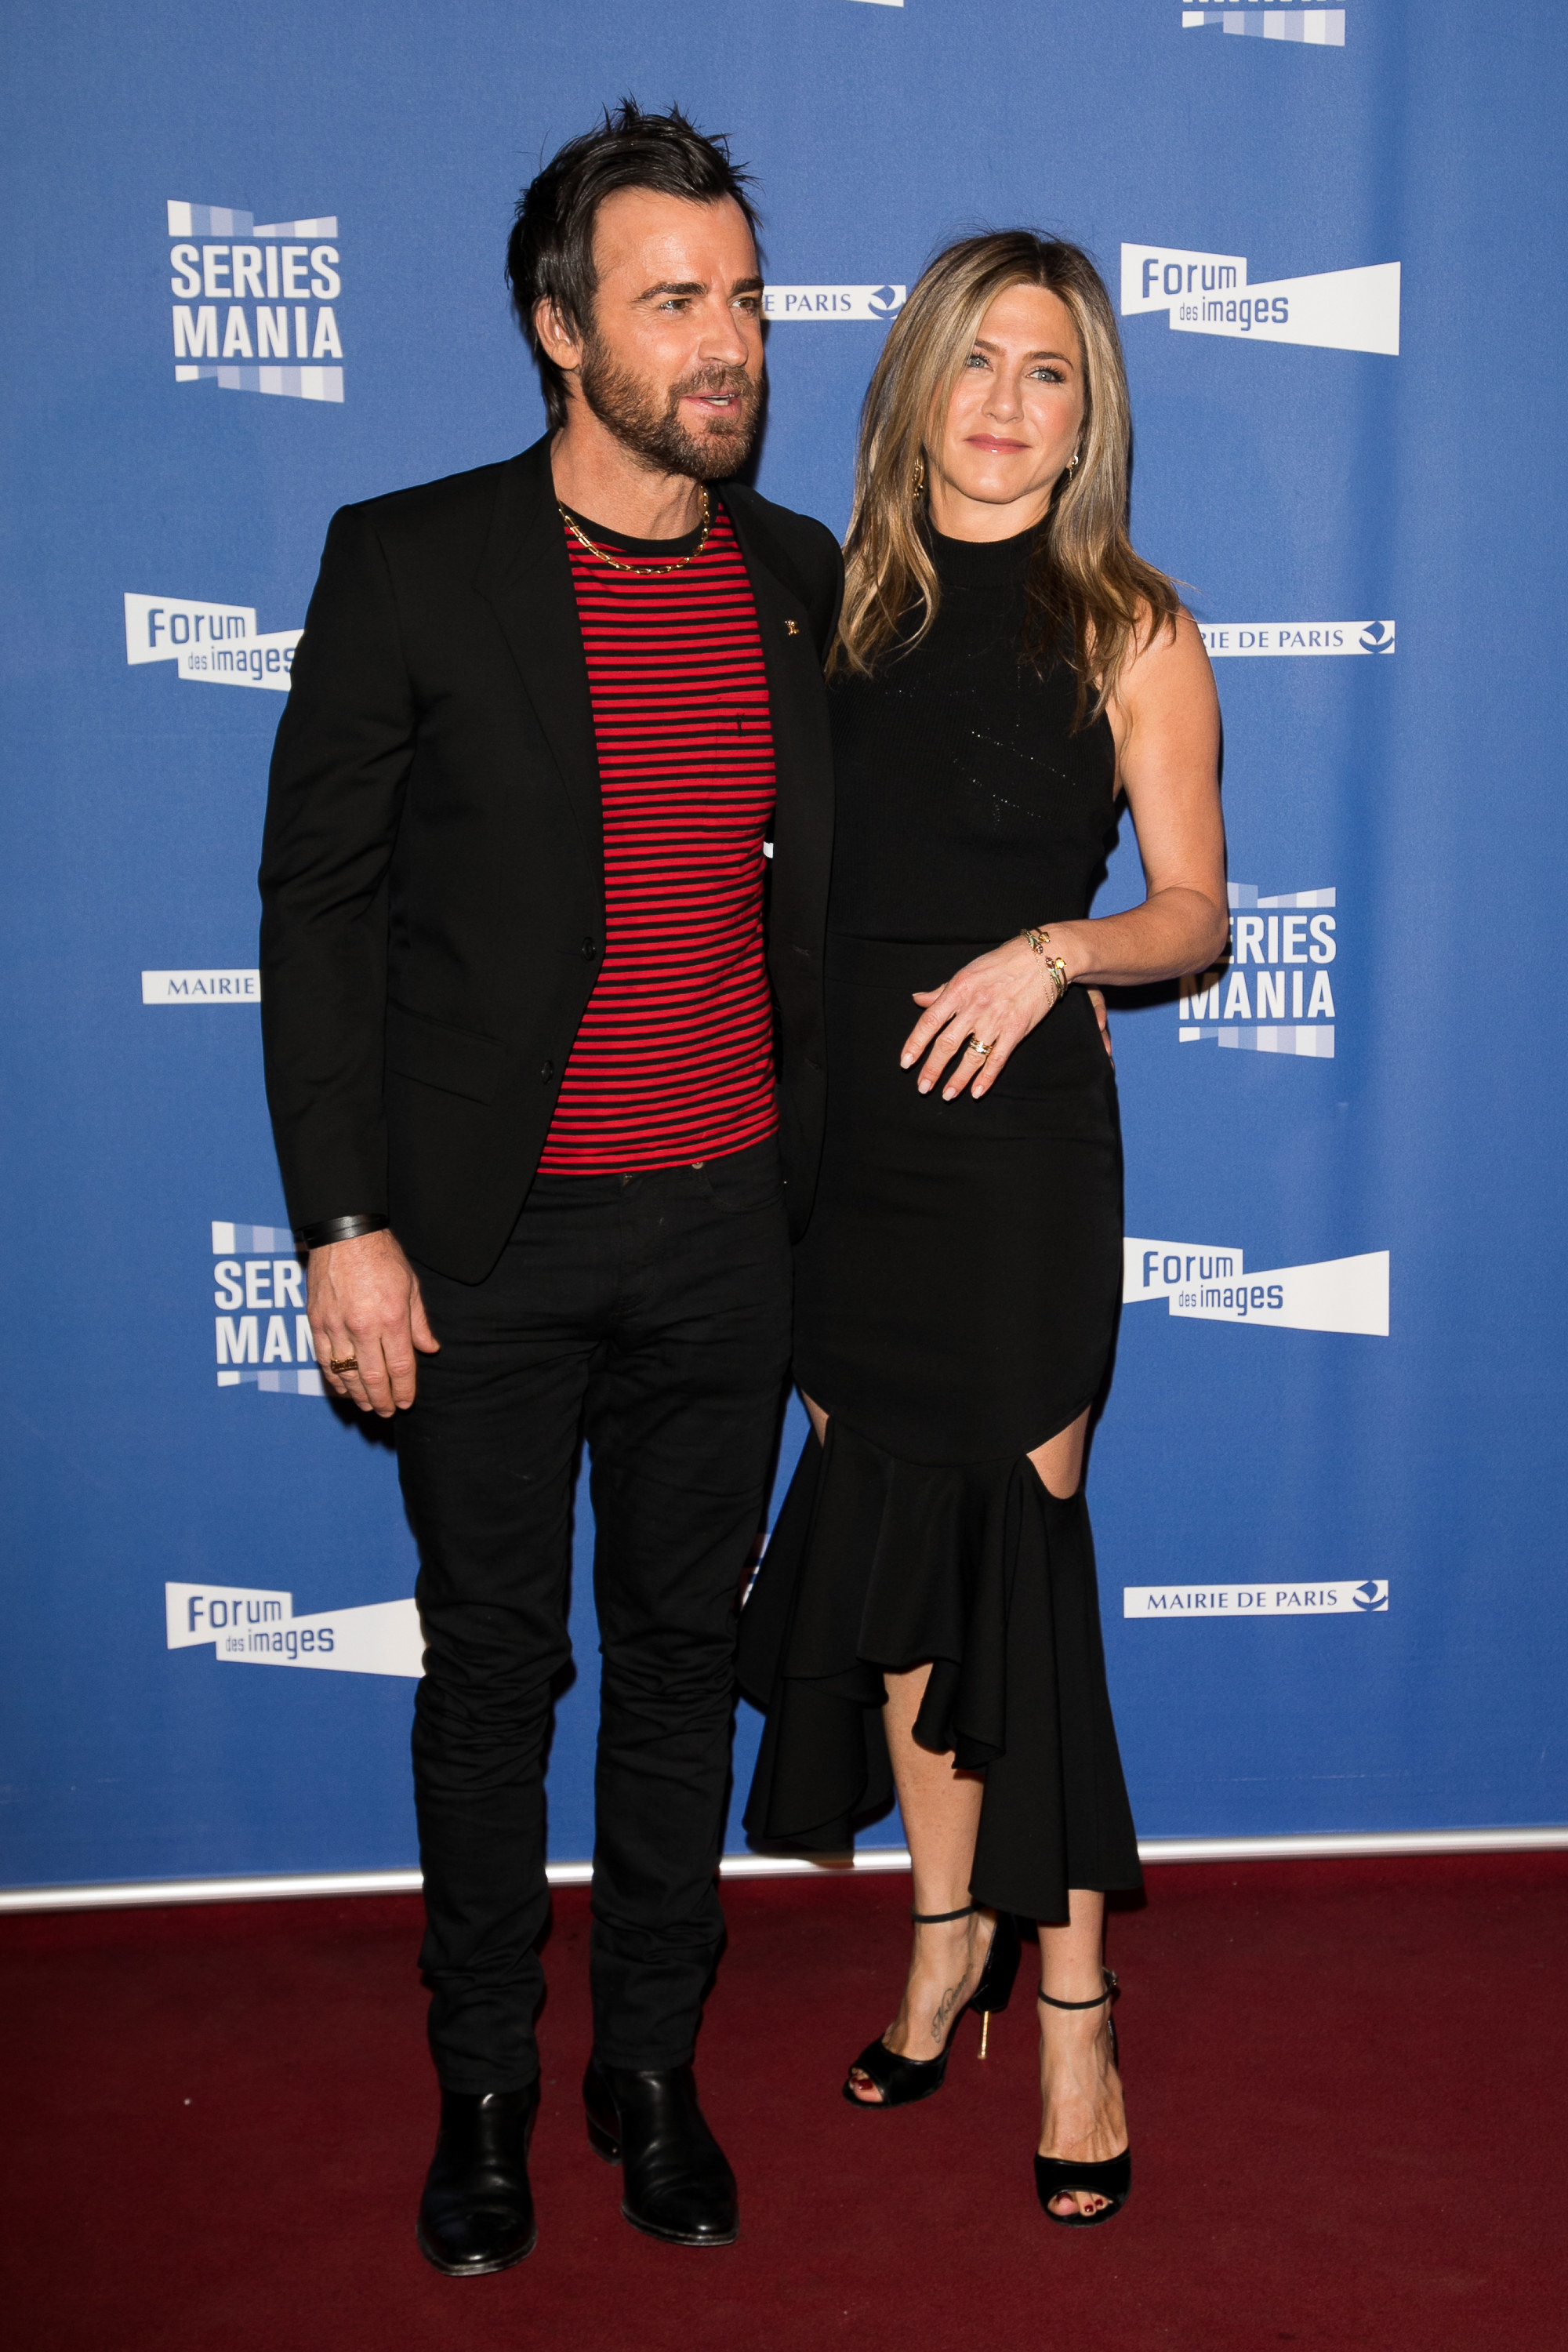 Justin Theroux and Jennifer Aniston on the red carpet